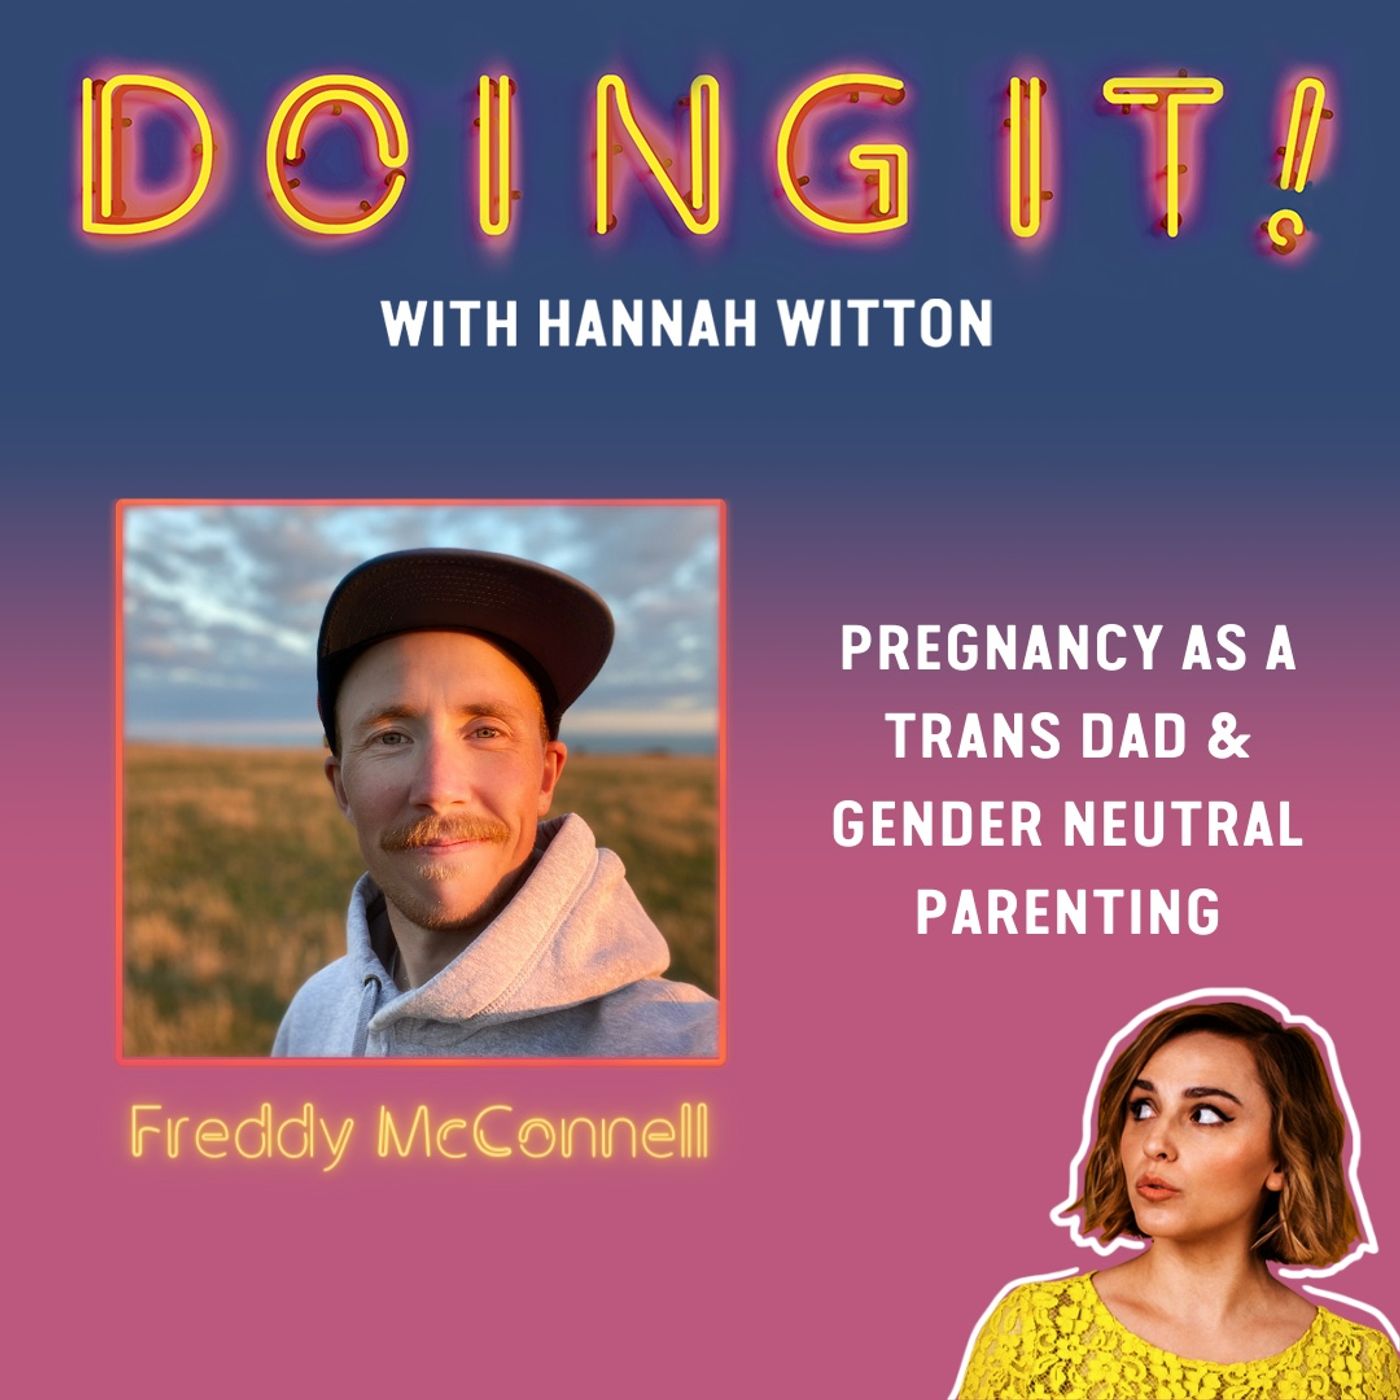 Pregnancy as a Trans Dad and Gender Neutral Parenting with Freddy McConnell